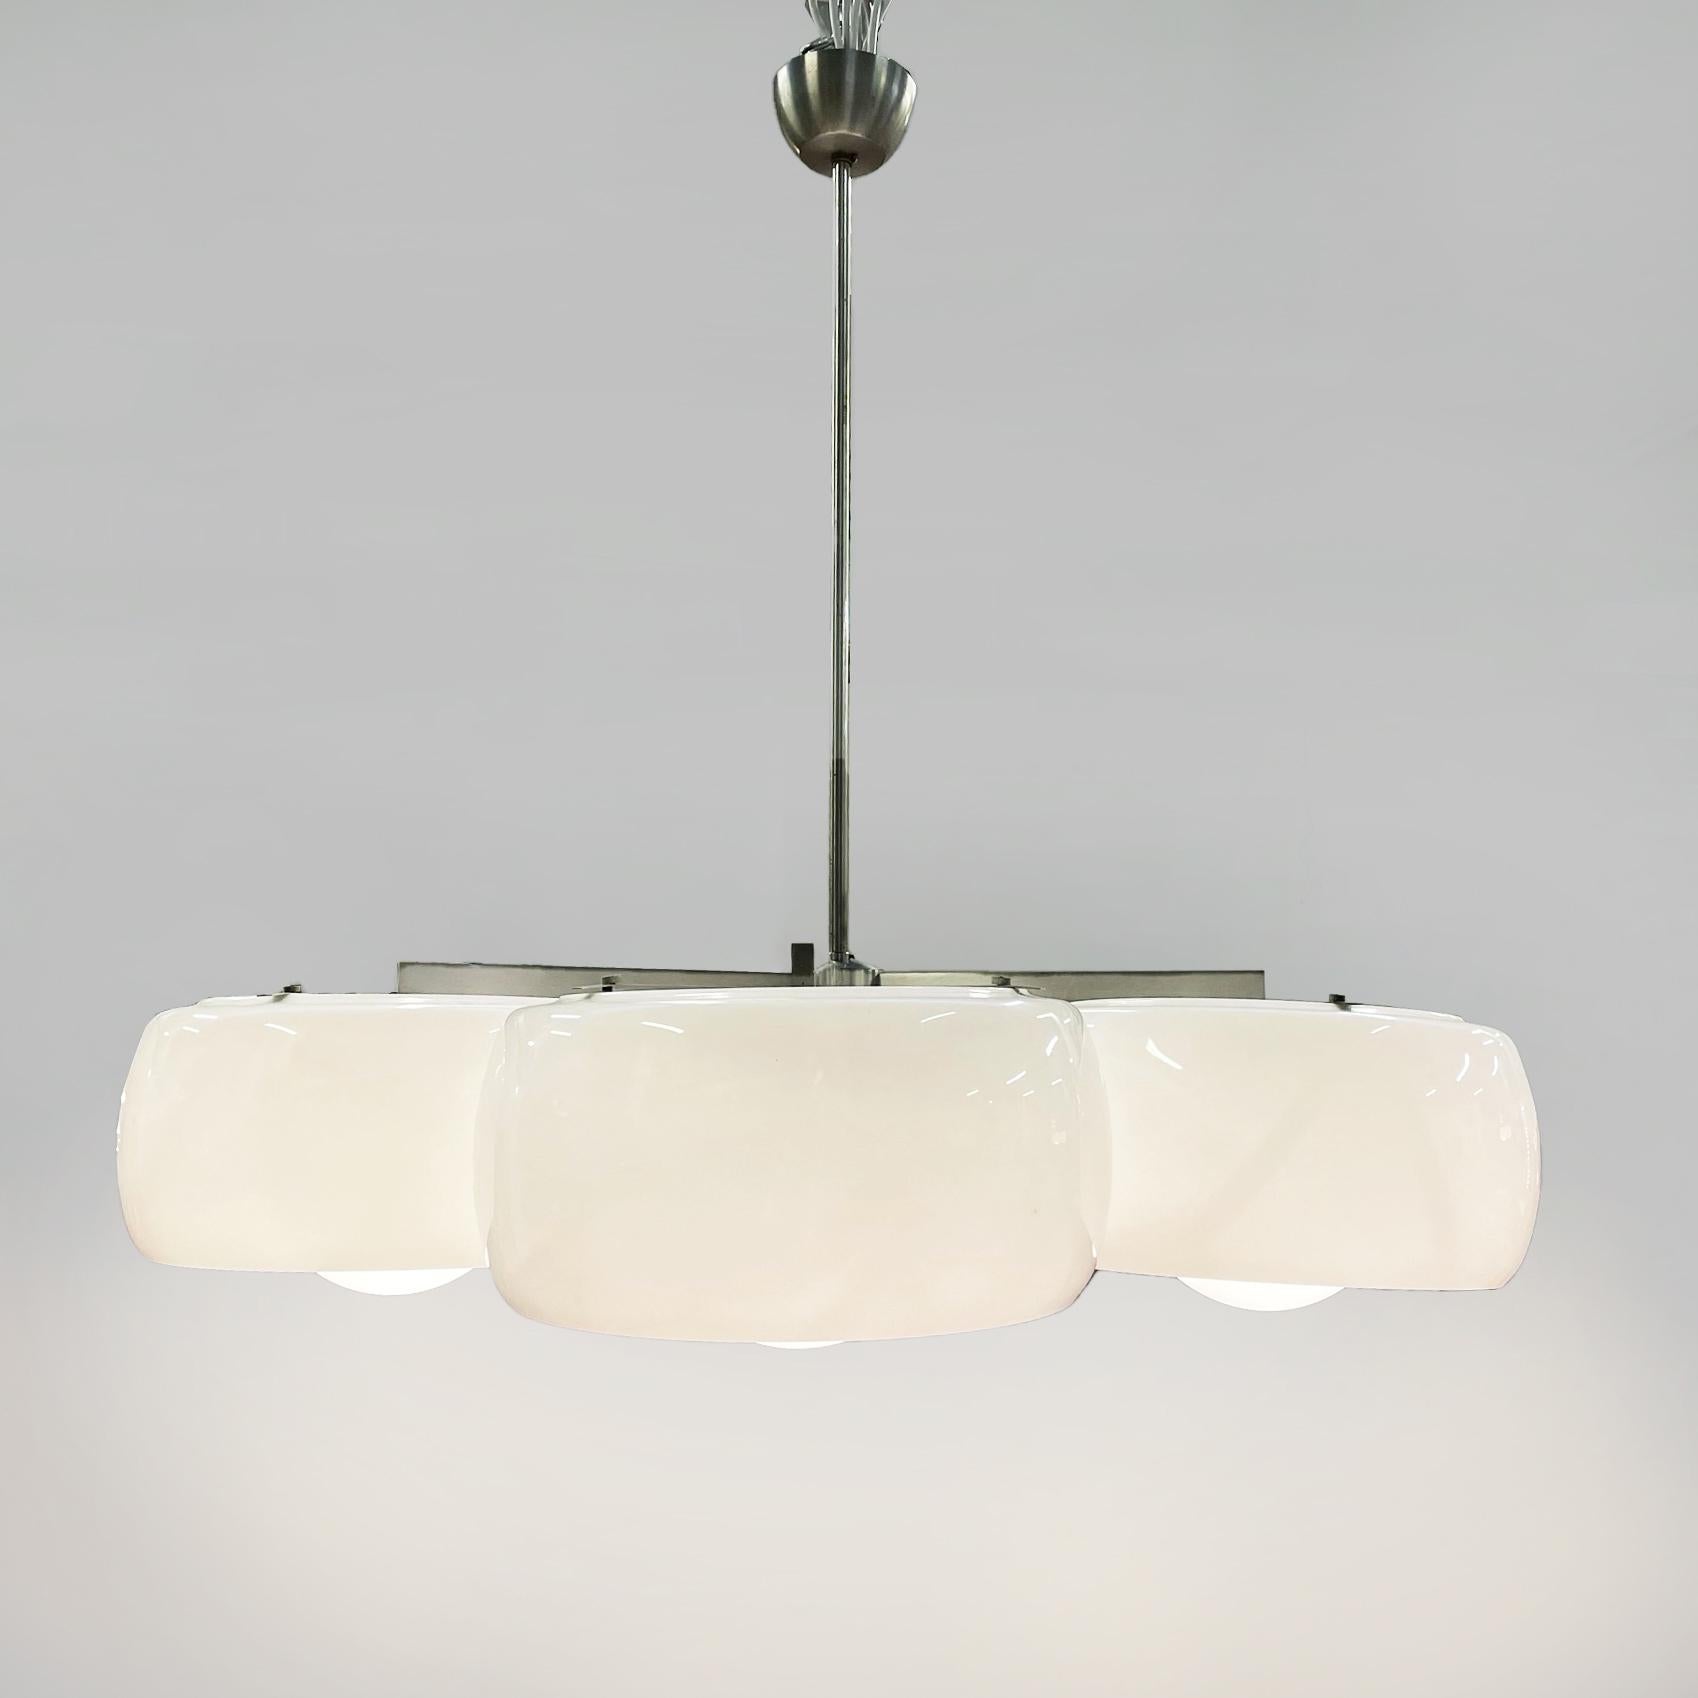 Italian mid-century Pentaclinio chandelier by Magistretti for Artemide, 1970s
Its a very rare ceiling lamp and its not so simple to find in this perfect conditions.
The glass of the ceiling is the original produced in Murano Italy.
Artemide Had